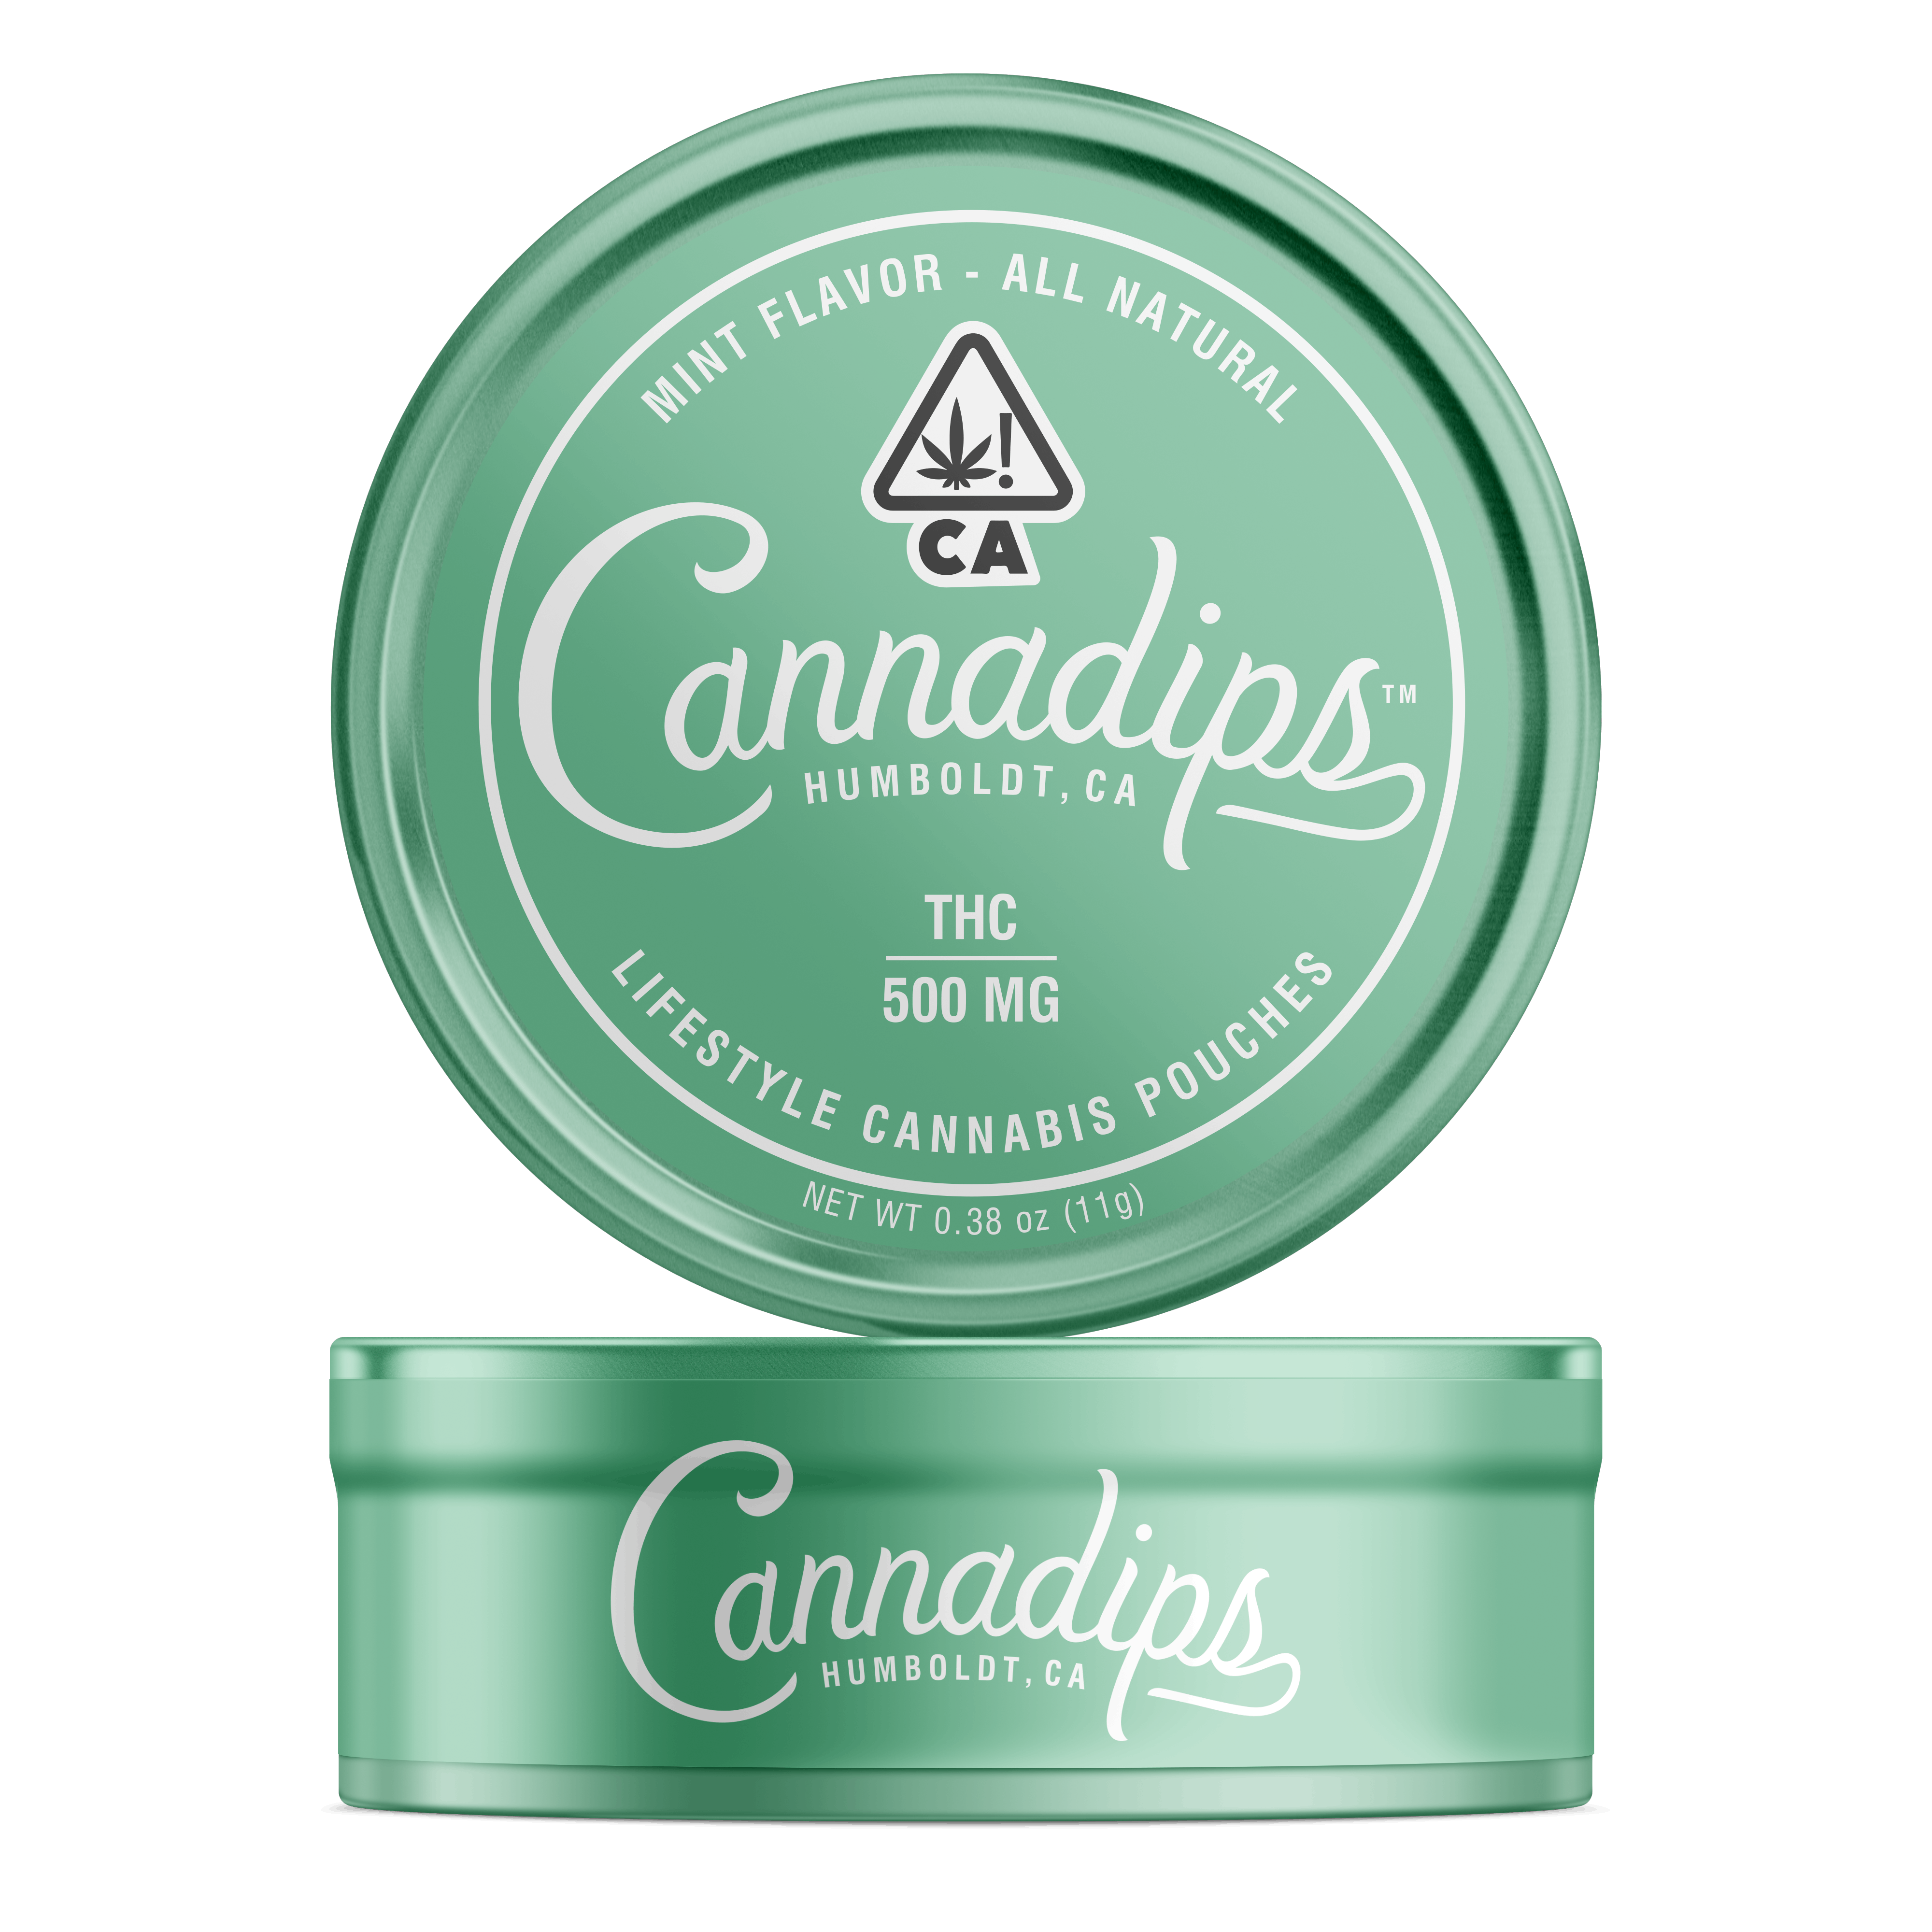 marijuana-dispensaries-sovereign-in-fort-bragg-cannadips-mint-pouches-thc-2c-high-dose-tin